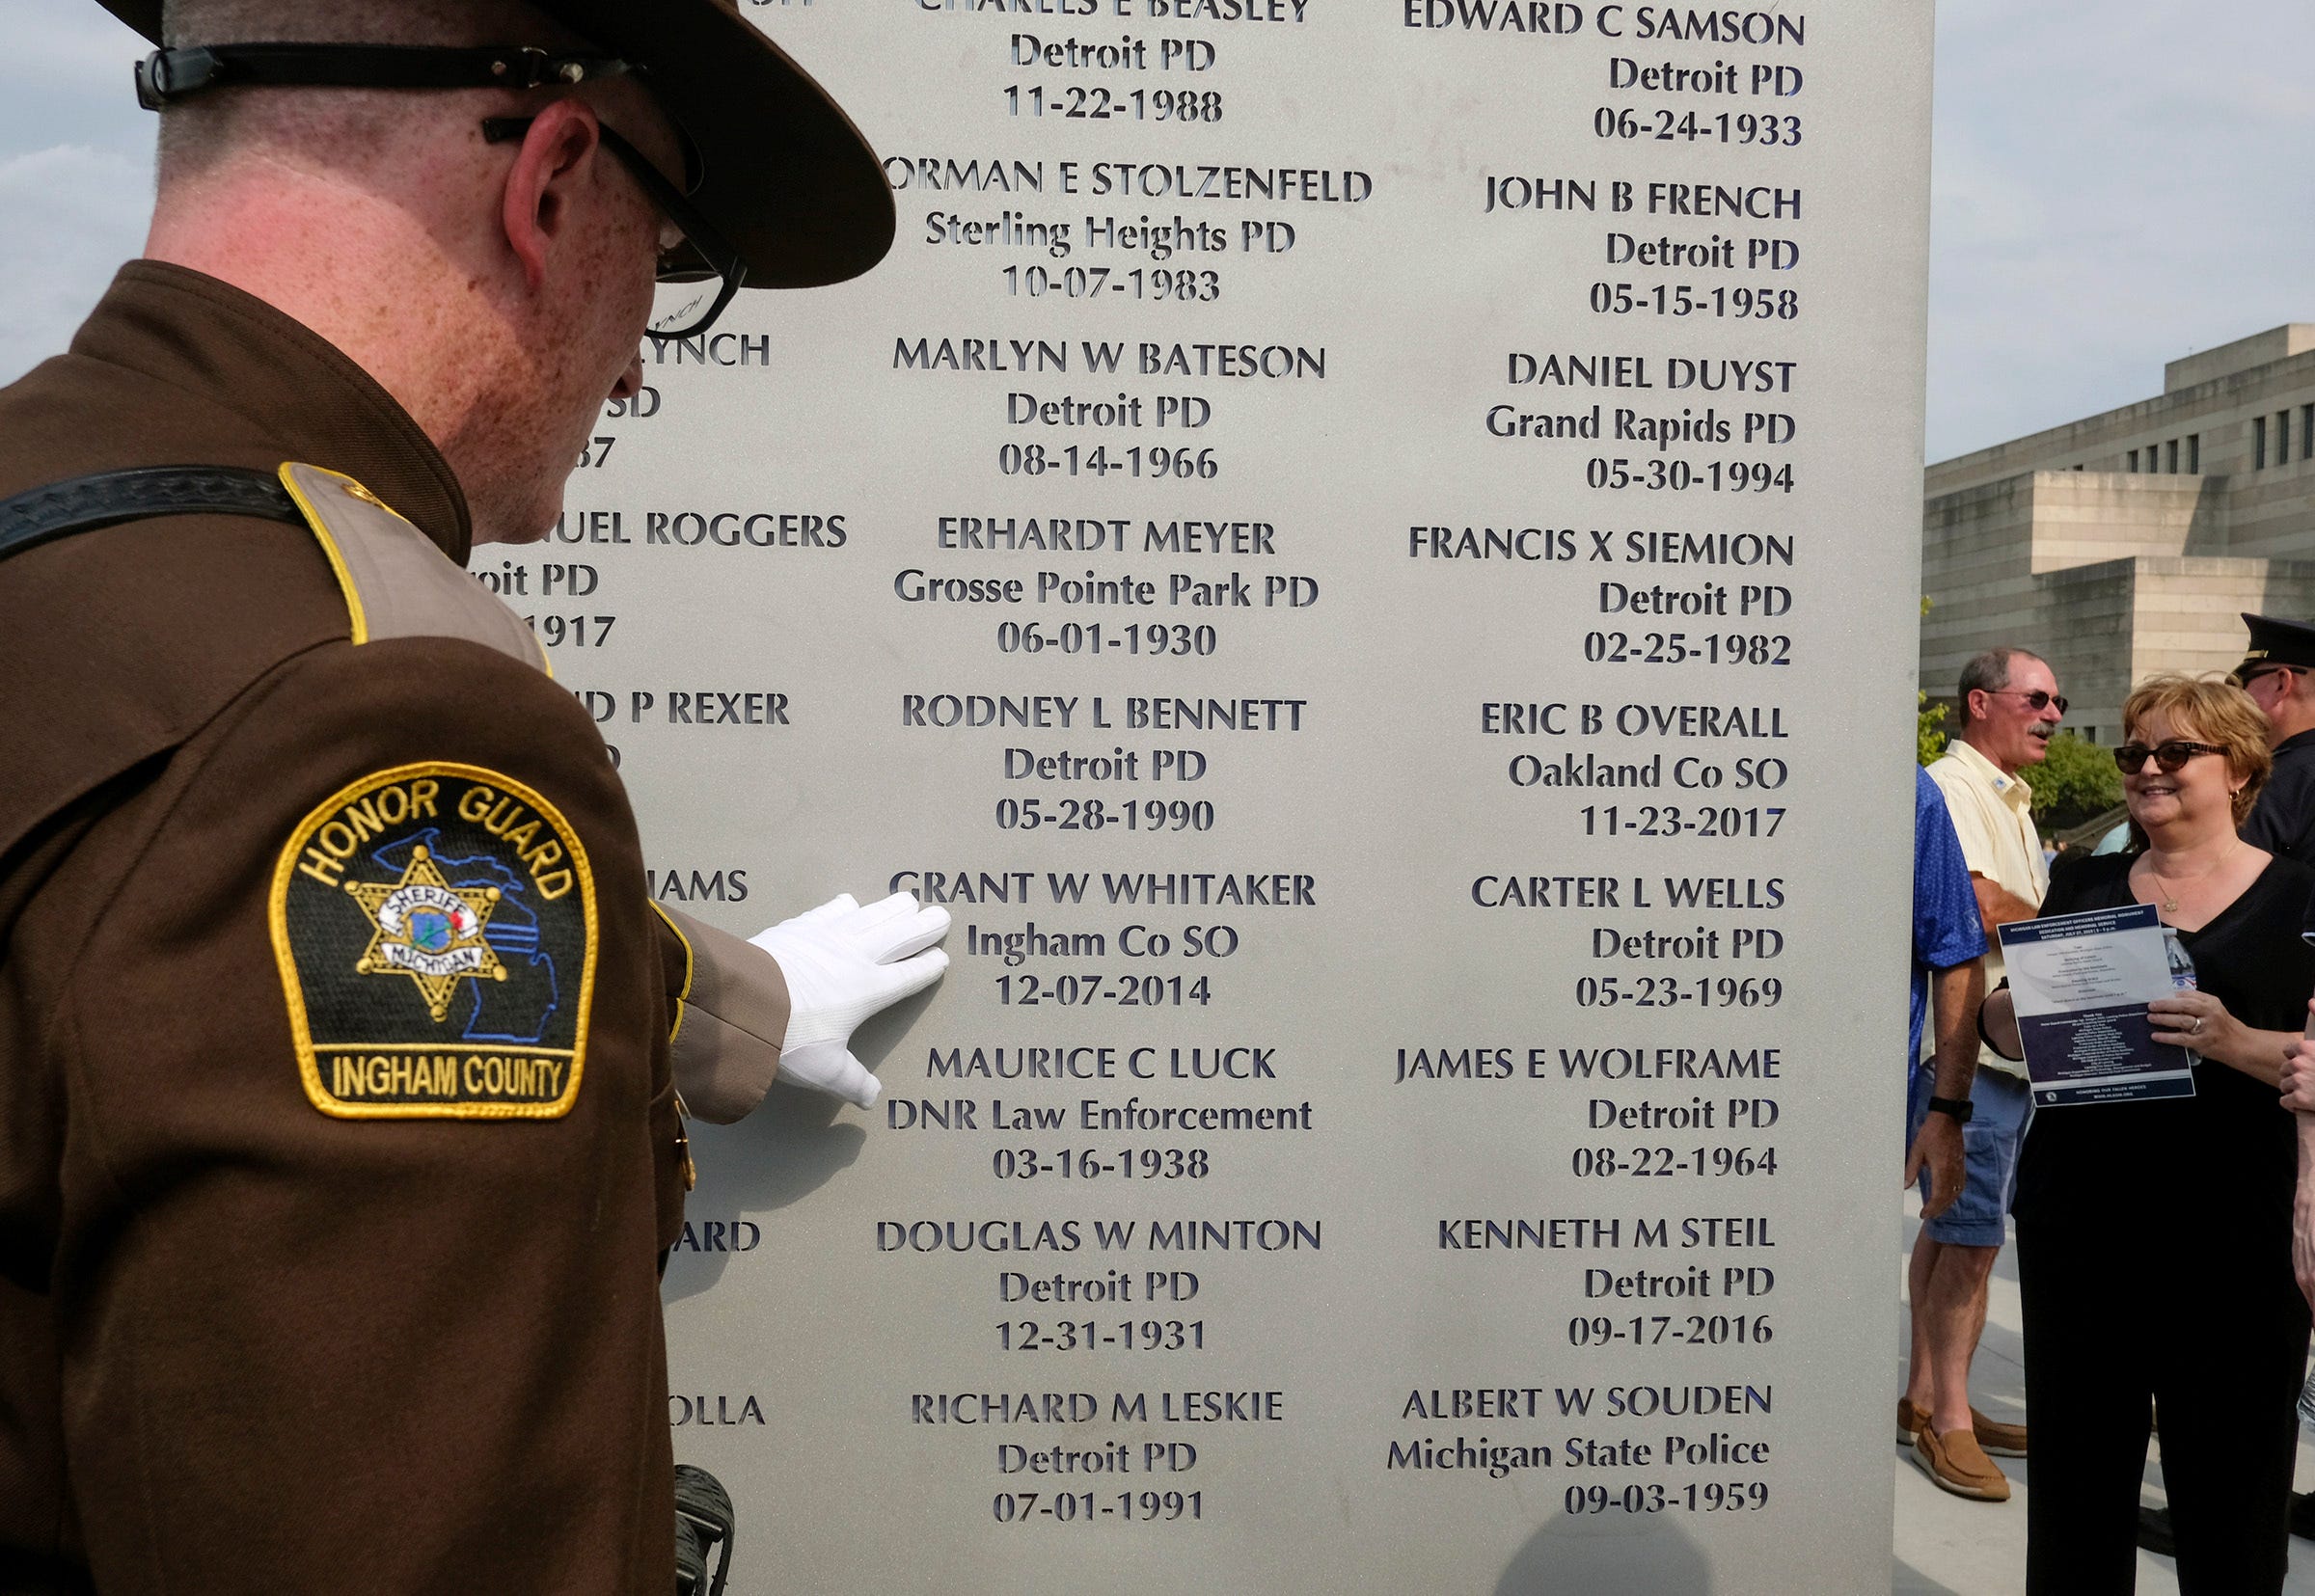 Ingham County Sheriff Deputy Matt Hutting touches the name of Grant W. Whitaker who died in the line of duty in December 2014 at the Michigan Law Enforcement Officer's Memorial Monument Dedication and Memorial Service Saturday in Lansing.